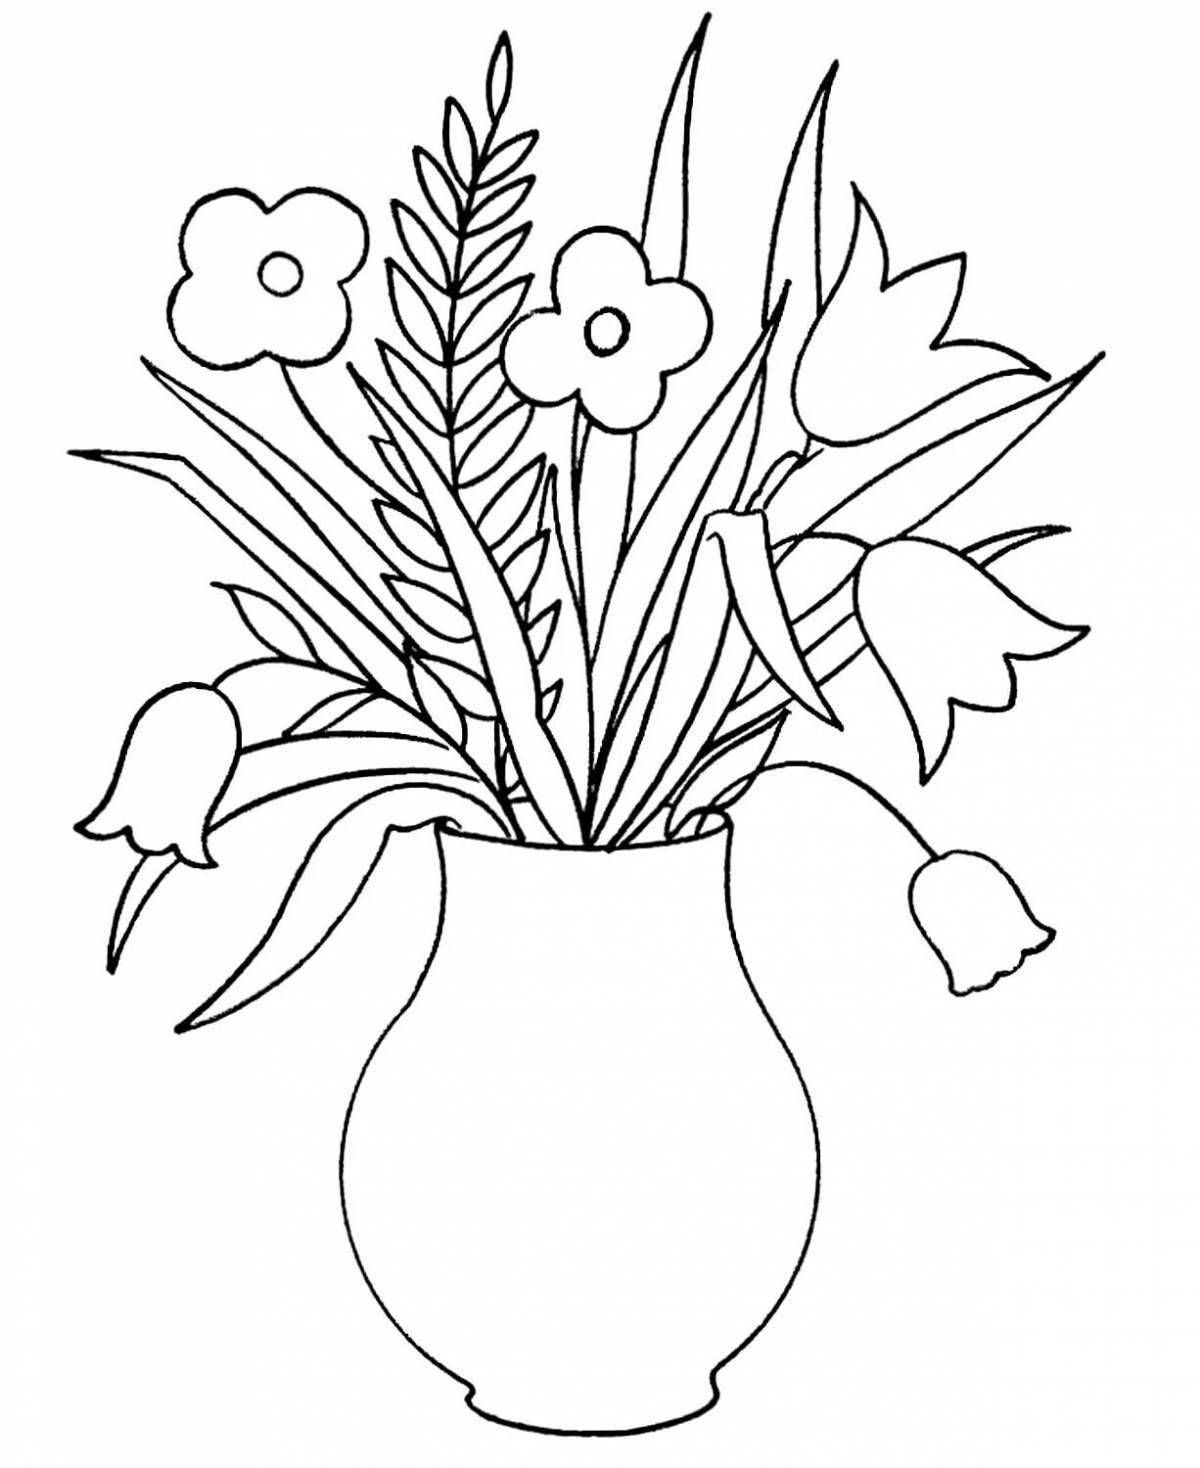 Coloring page charming bouquet in a vase